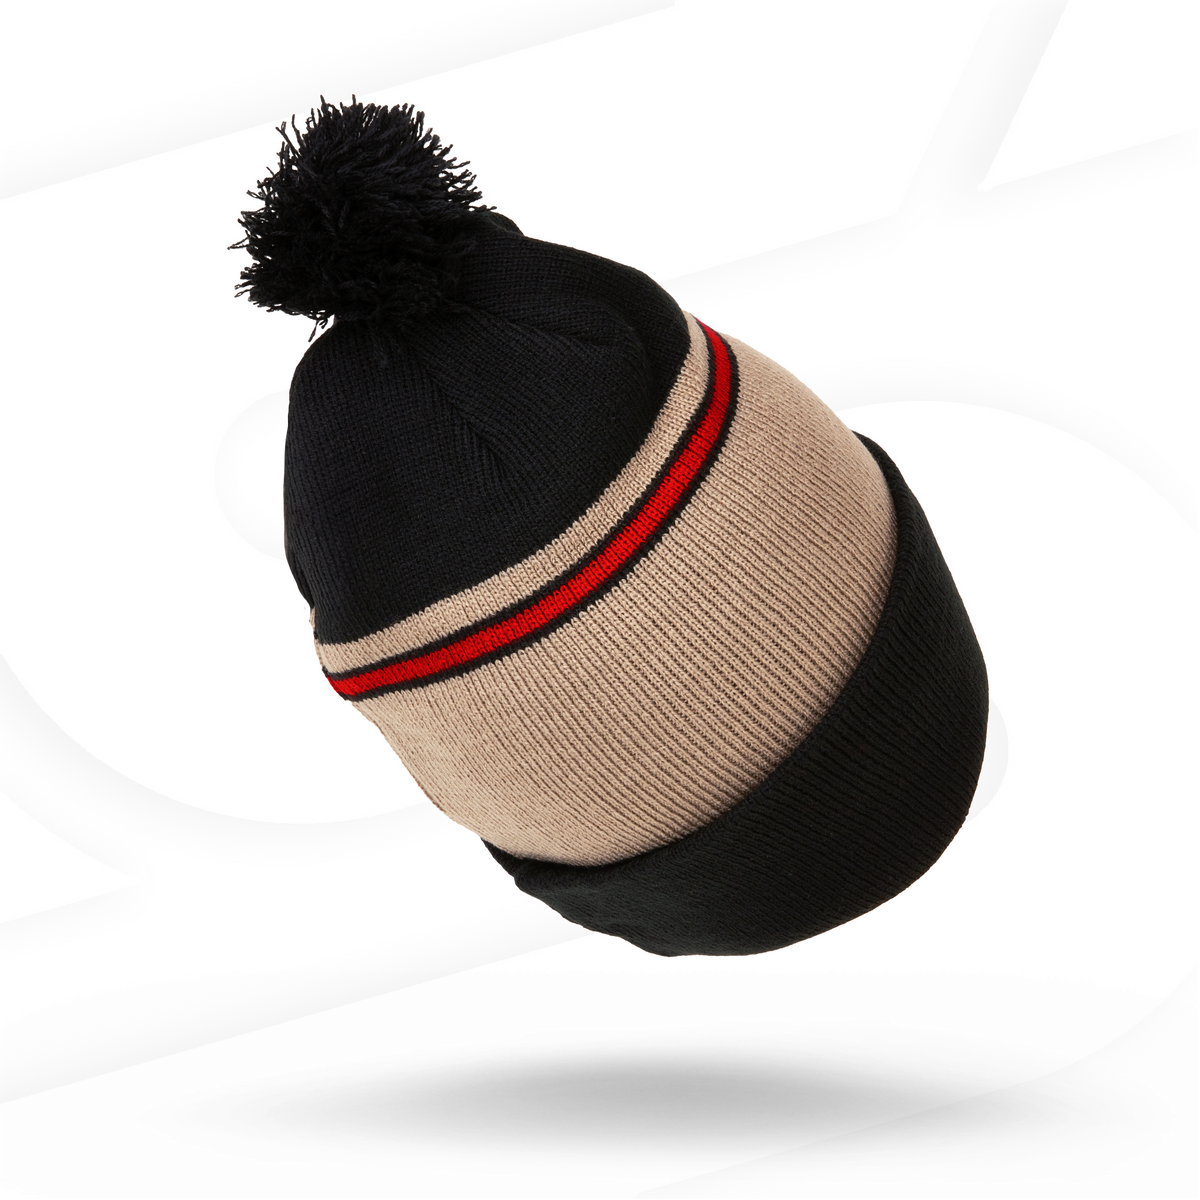 RAW Knit Beanie Hat | Black and Brown Clothing Accessories RAWU-APRP-0004 esd-official